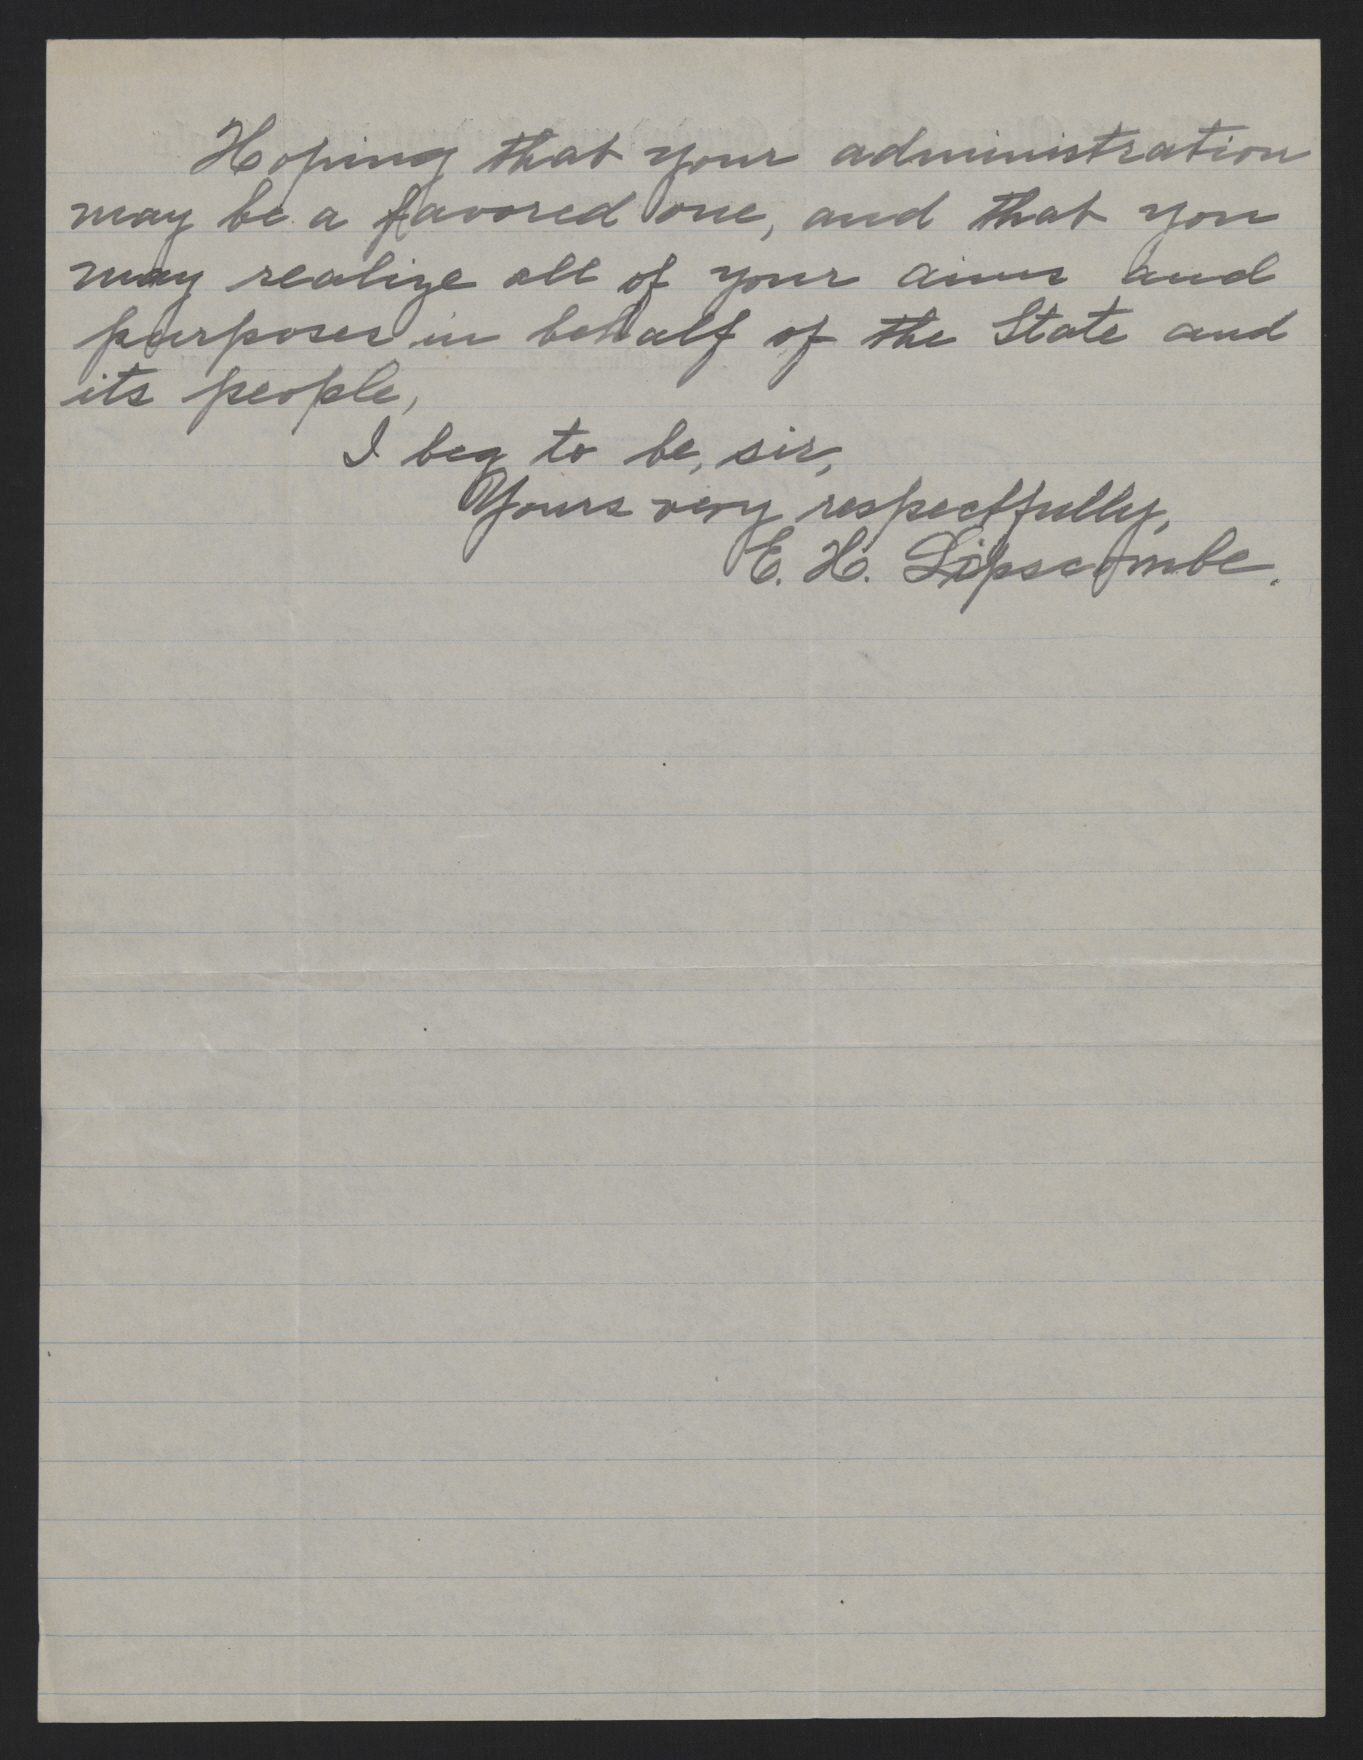 Letter from Lipscombe to Craig, December 24, 1912, page 2